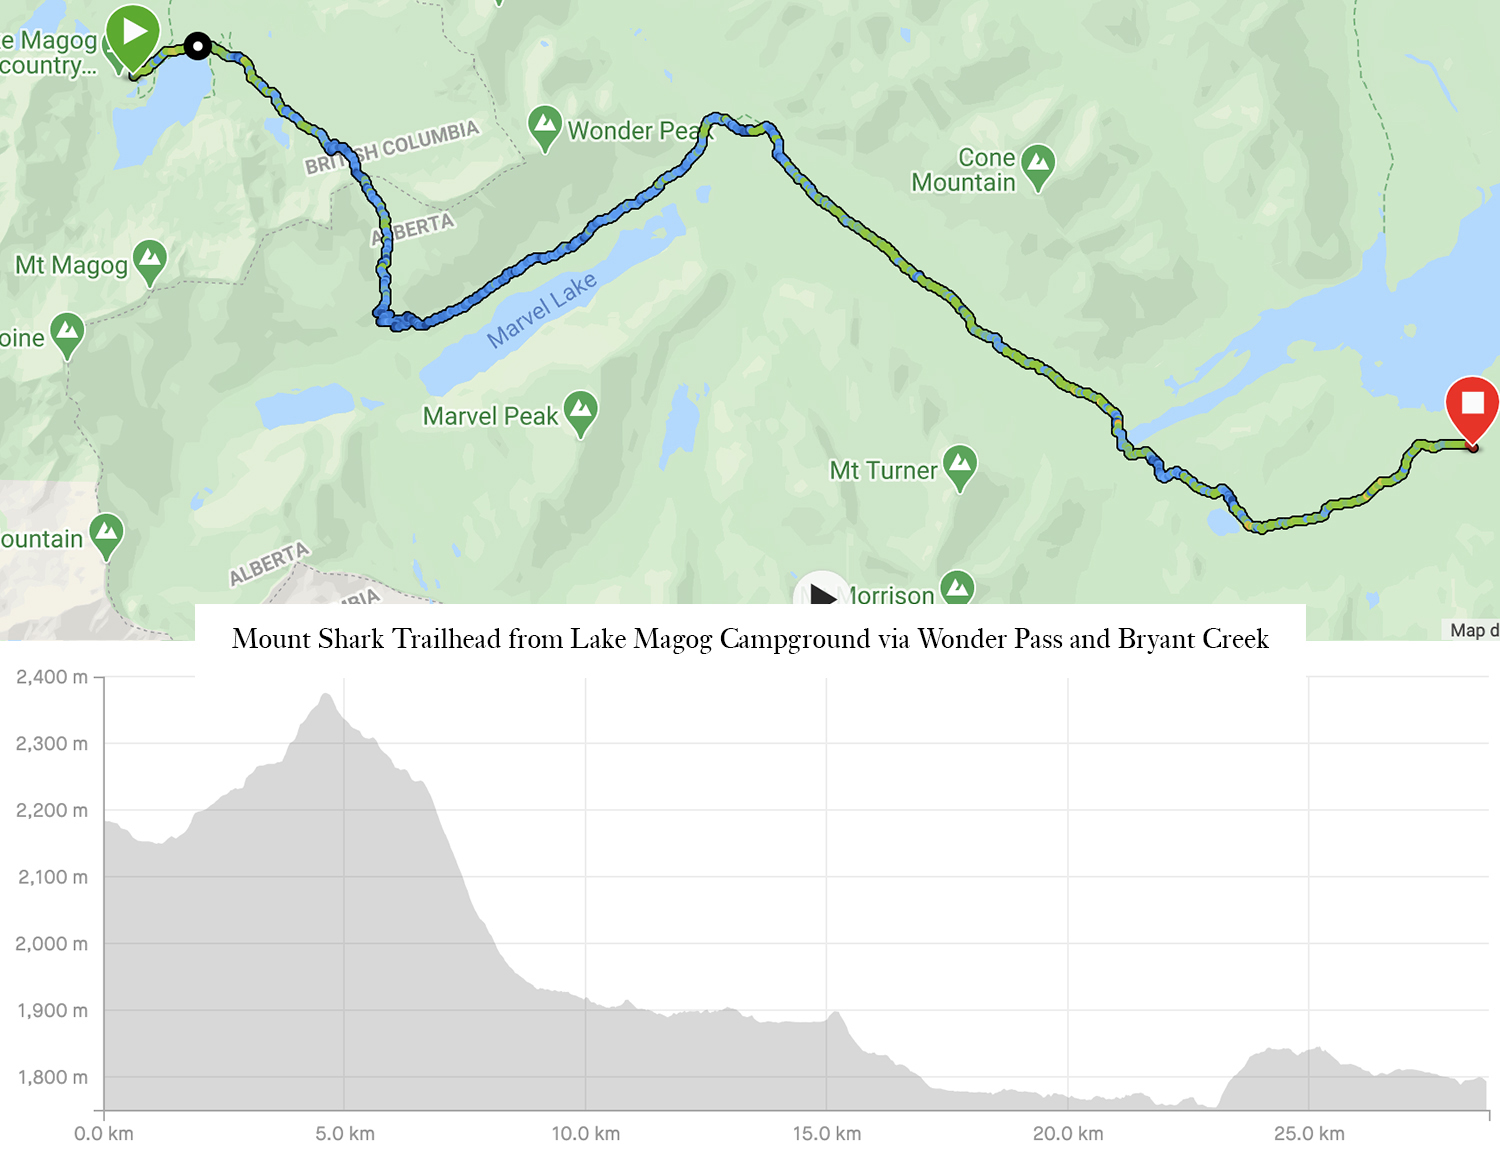 Map and elevation of backpacking route to Mount Shark Trailhead from lake Magog Campground via Wonder Pass and Bryant Creek